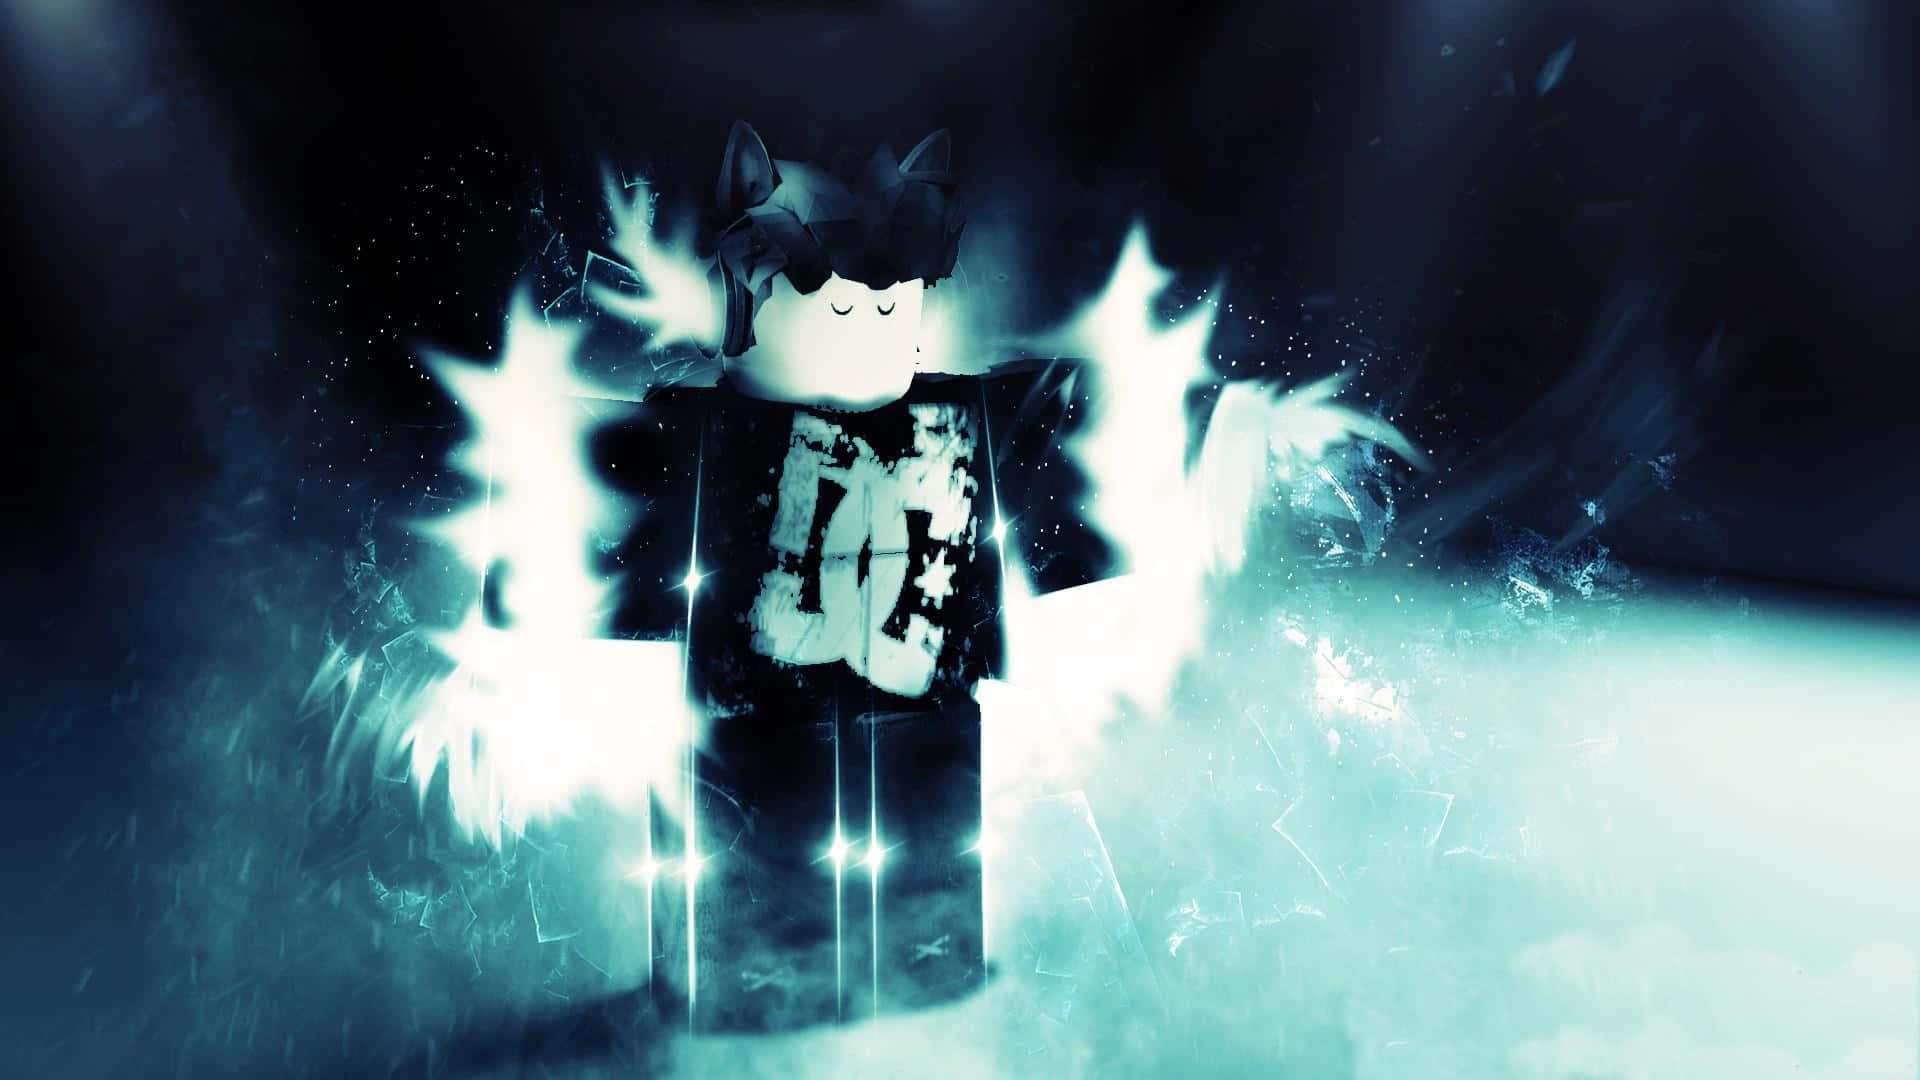 "Welcome to the amazing world of Roblox Blue!" Wallpaper